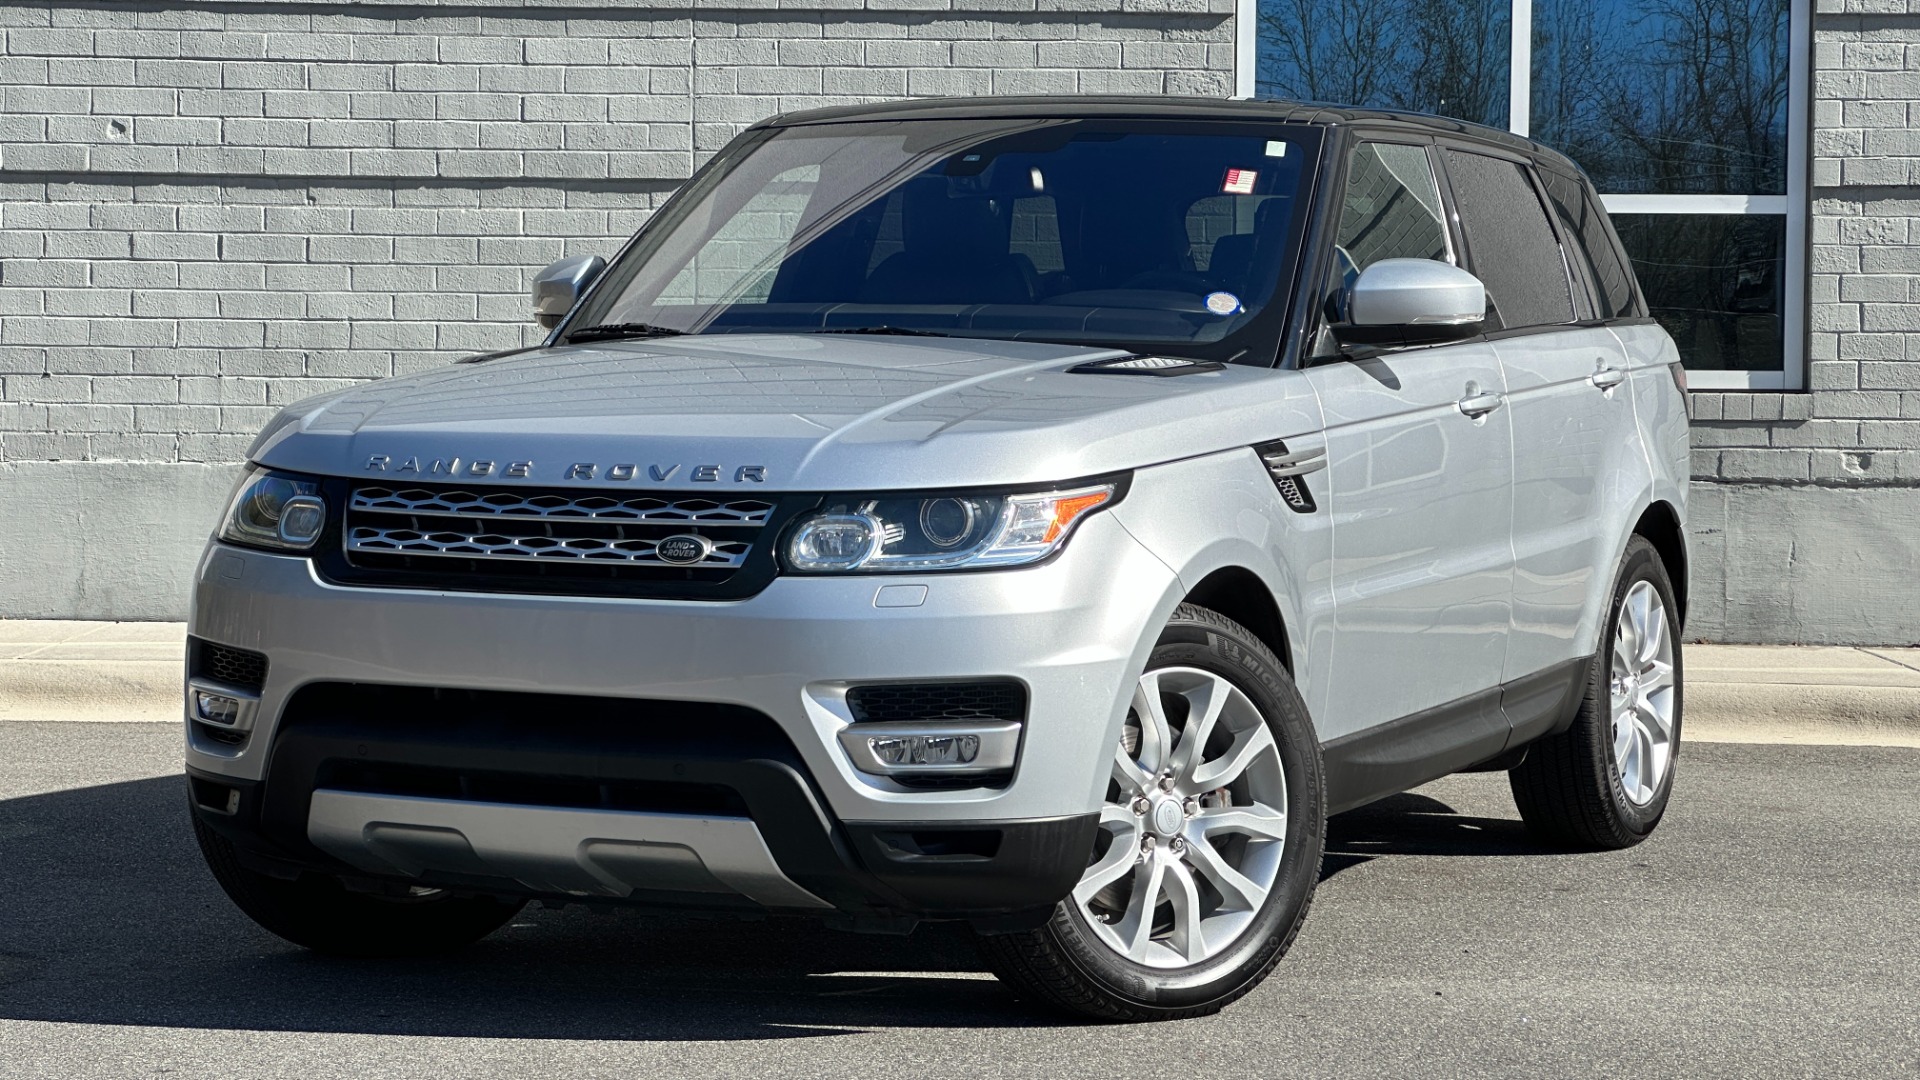 Used 2016 Land Rover Range Rover Sport V6 HSE / VISIBILITY PACKAGE / PANORAMIC ROOF / CLIMATE PACKAGE for sale Sold at Formula Imports in Charlotte NC 28227 1